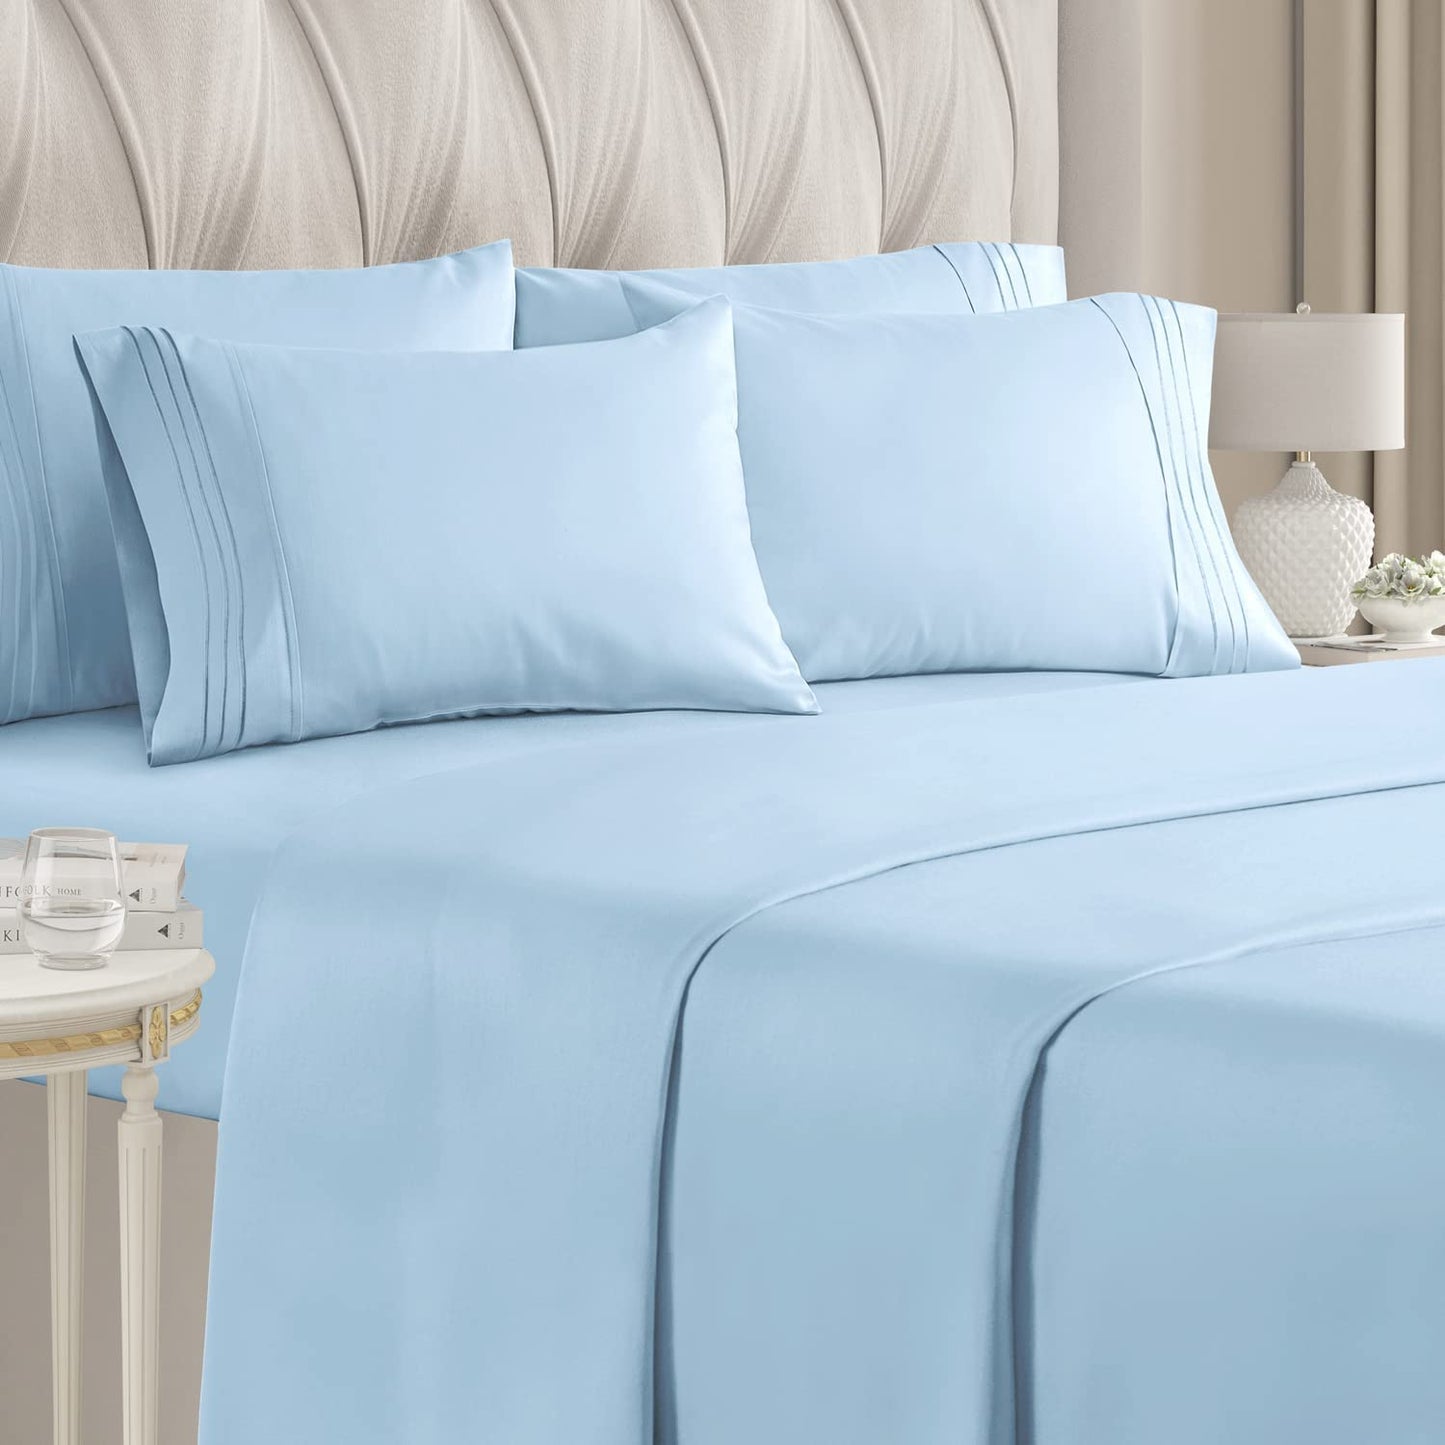 Buy Egyptian Cotton 1000-TC Sheet Set Queen Blue at-EgyptianHomeLinens.com